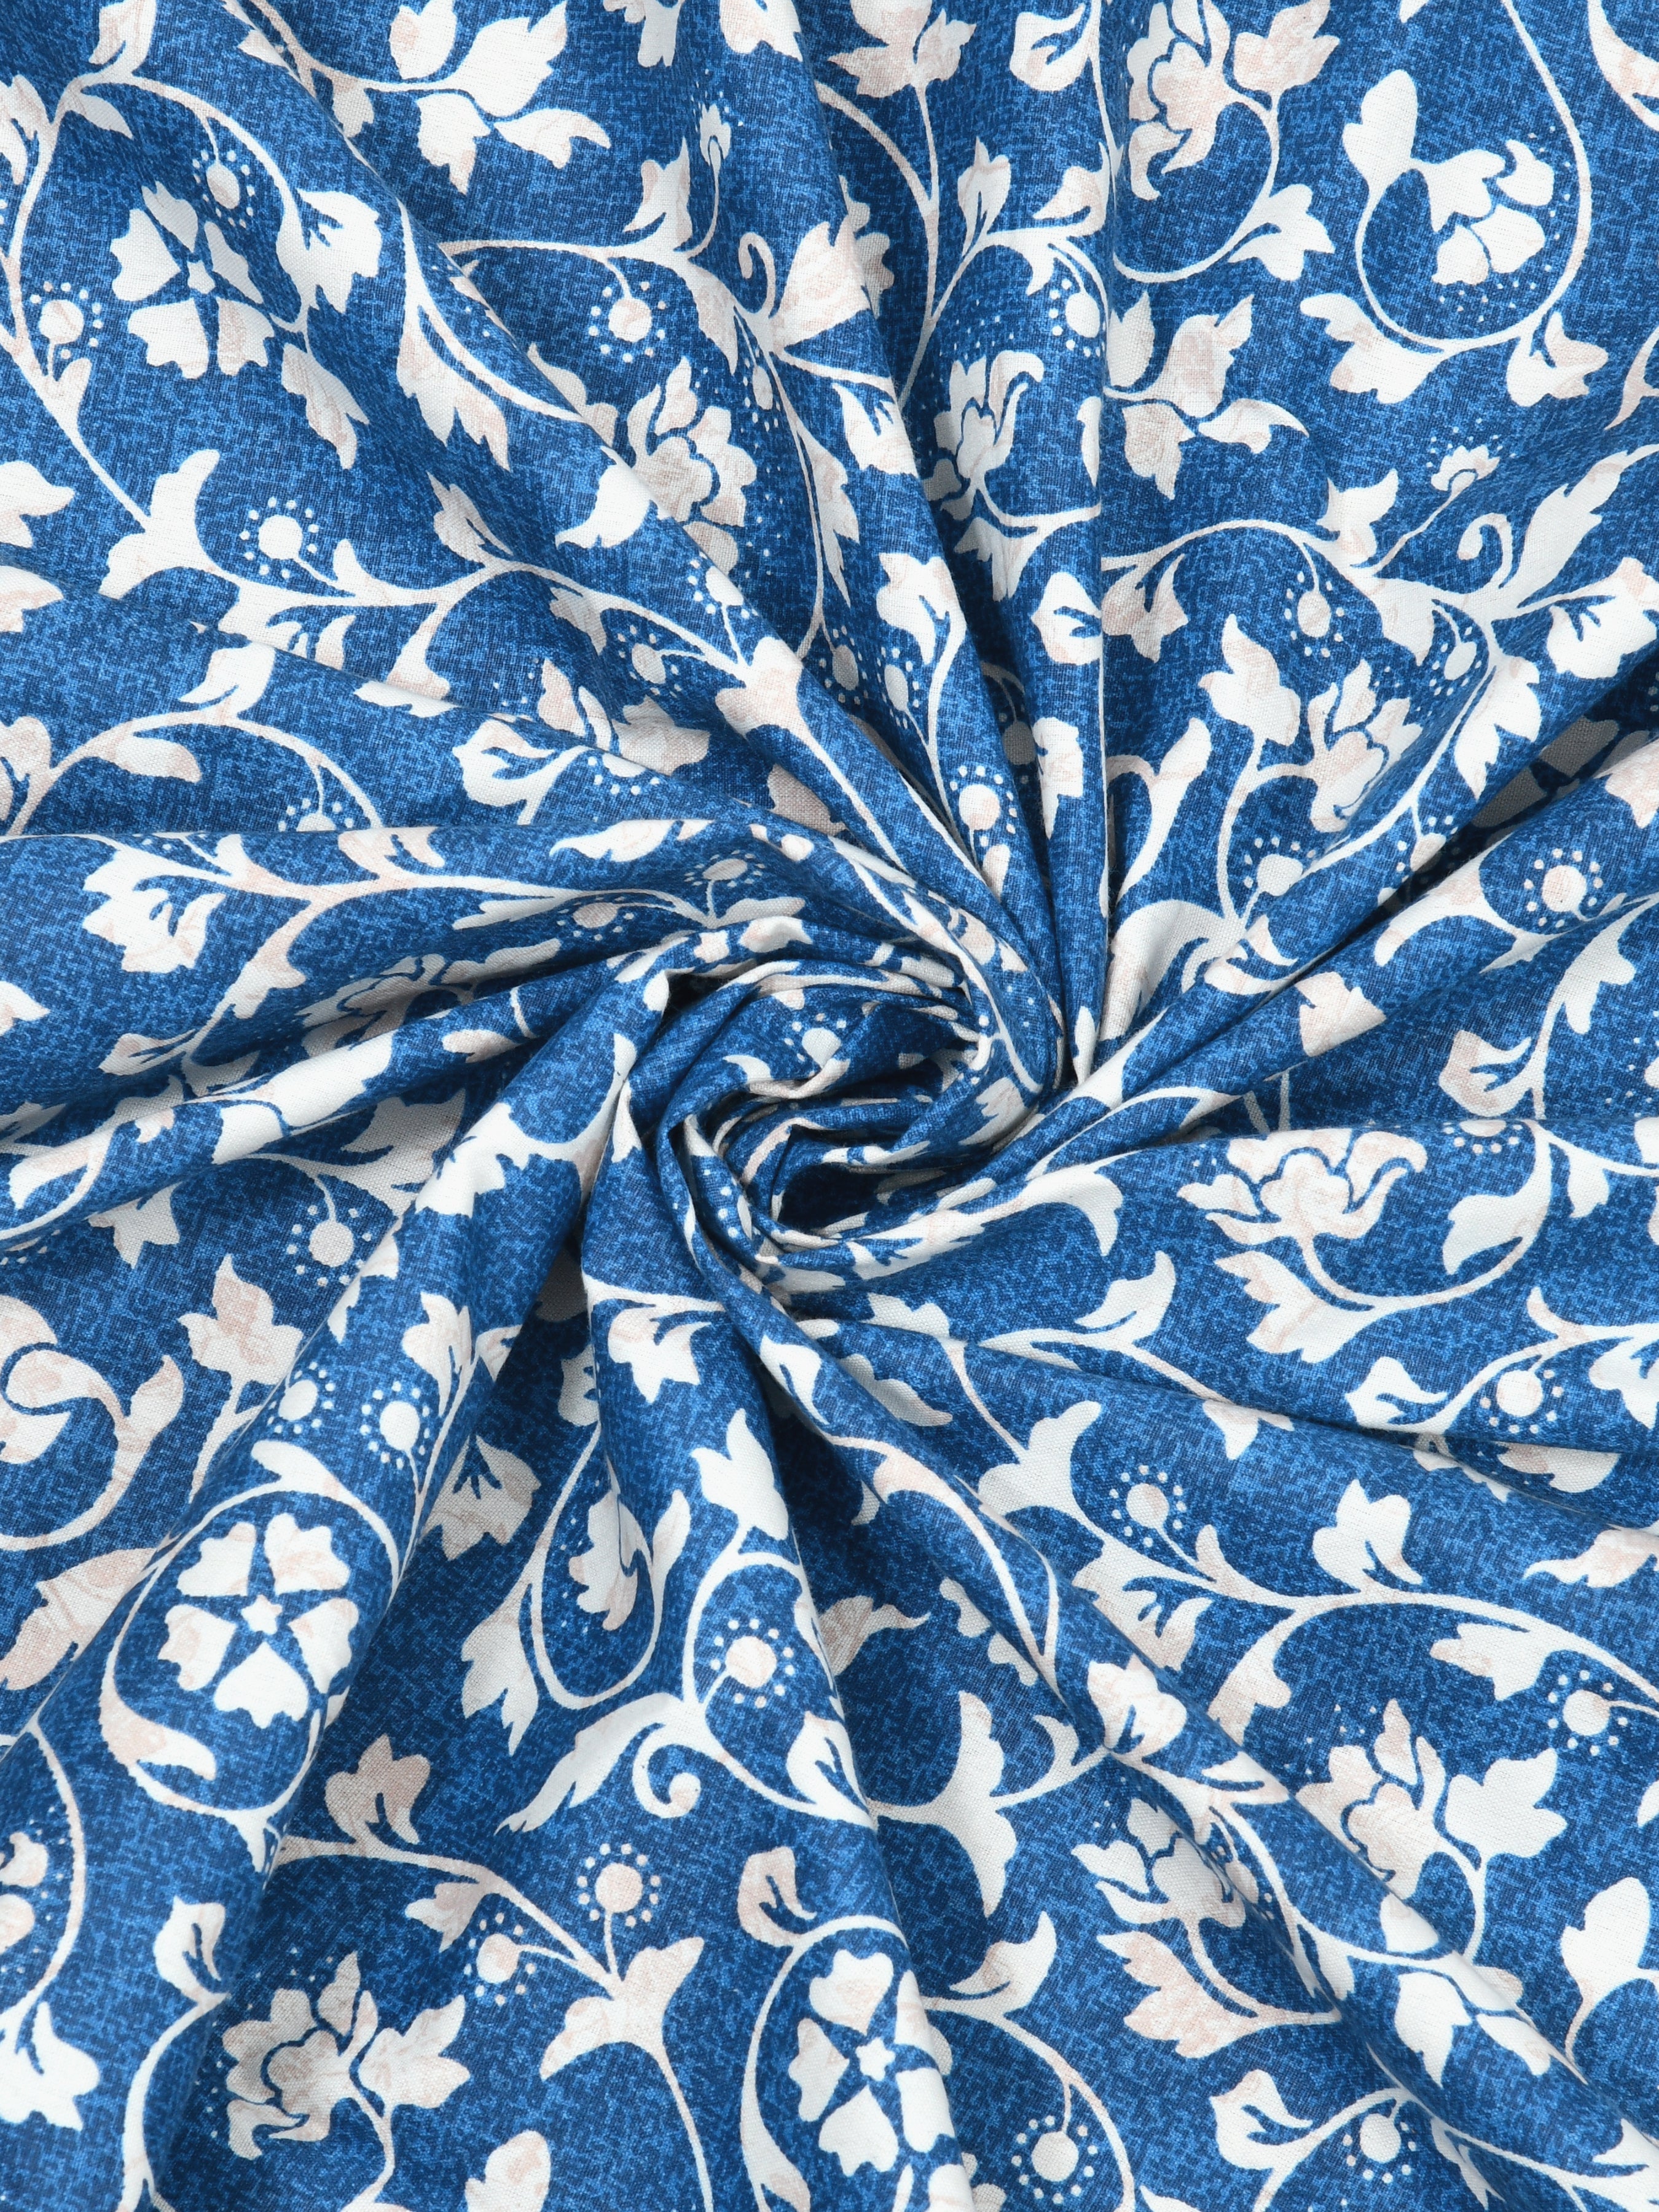 Blue and White Floral Super King Size Cotton Bedsheet